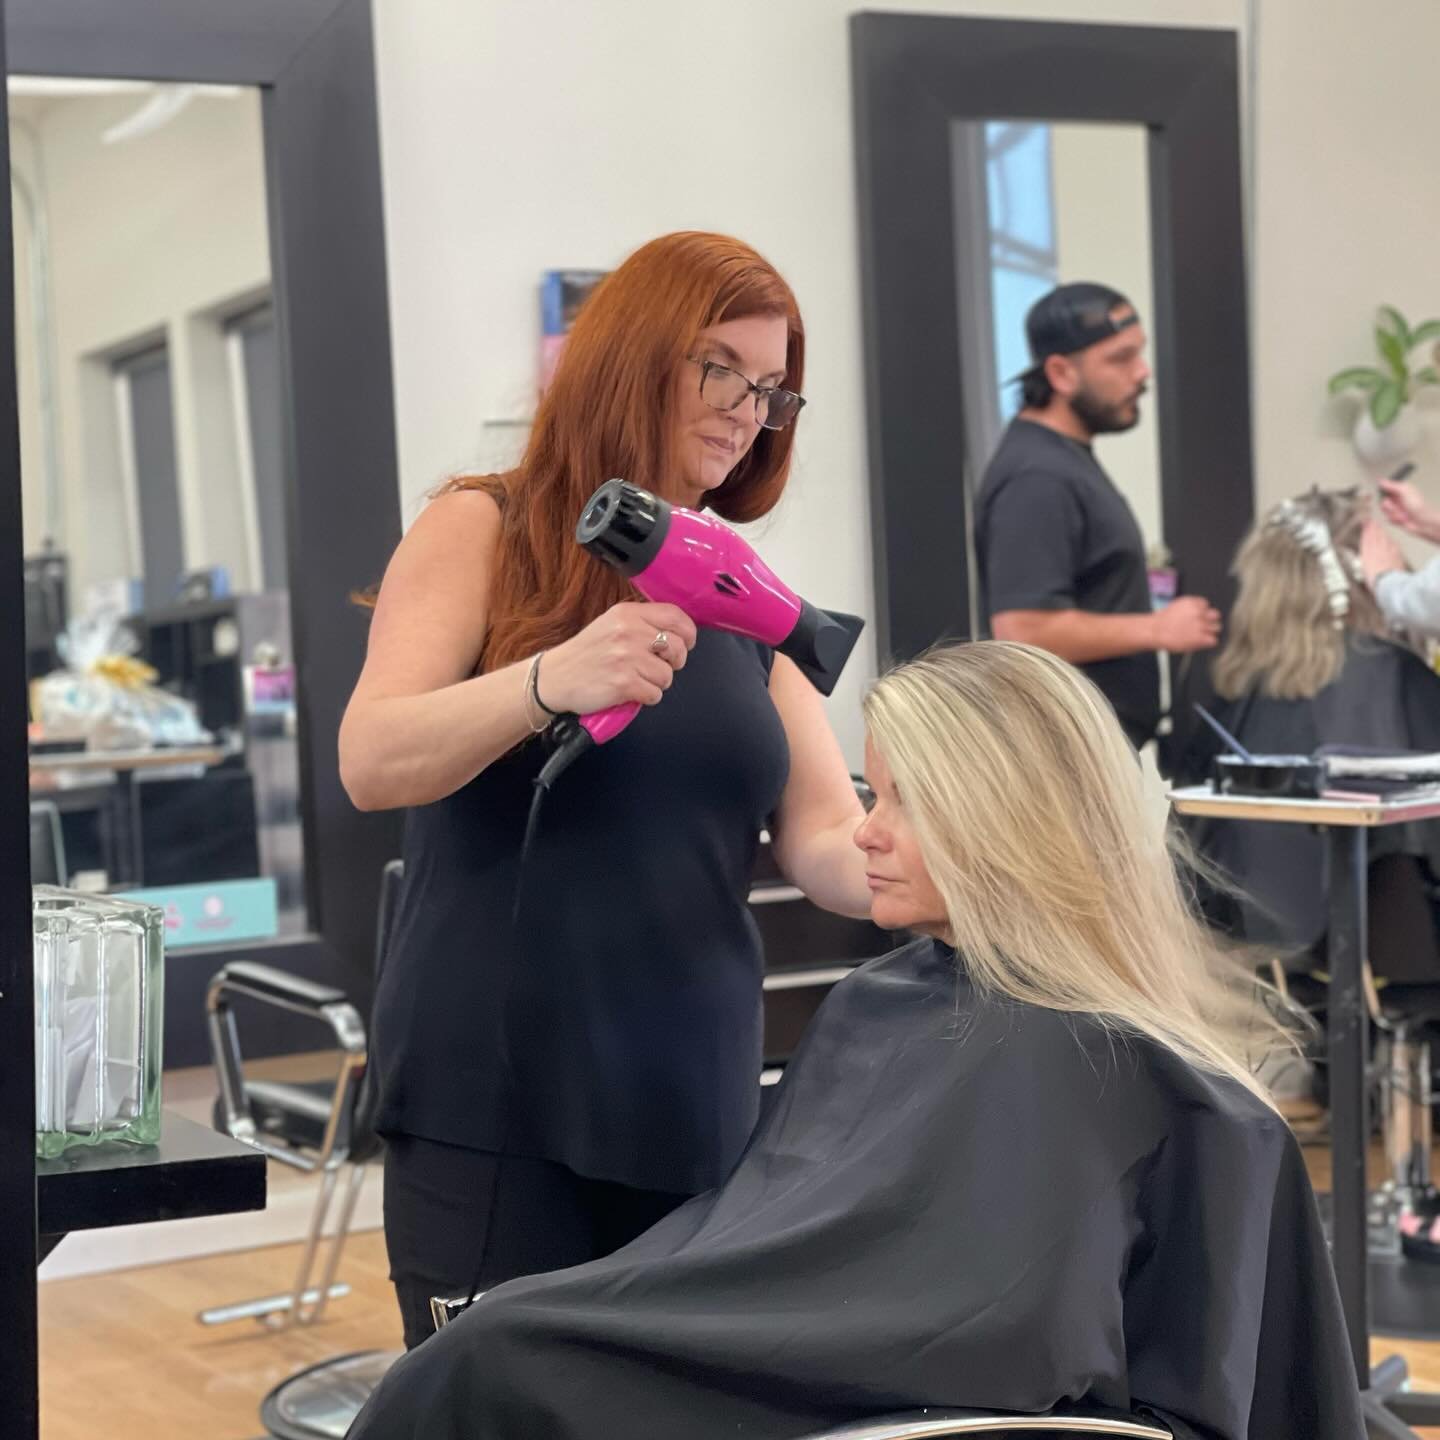 Book a blow out! We&rsquo;re excited to announce we have appointments available for Blow Outs this Saturday as part of our Annual Cut-A-Thon &amp; Block Party. Book today and help support two amazing nonprofits in our community. 

Plus don&rsquo;t fo